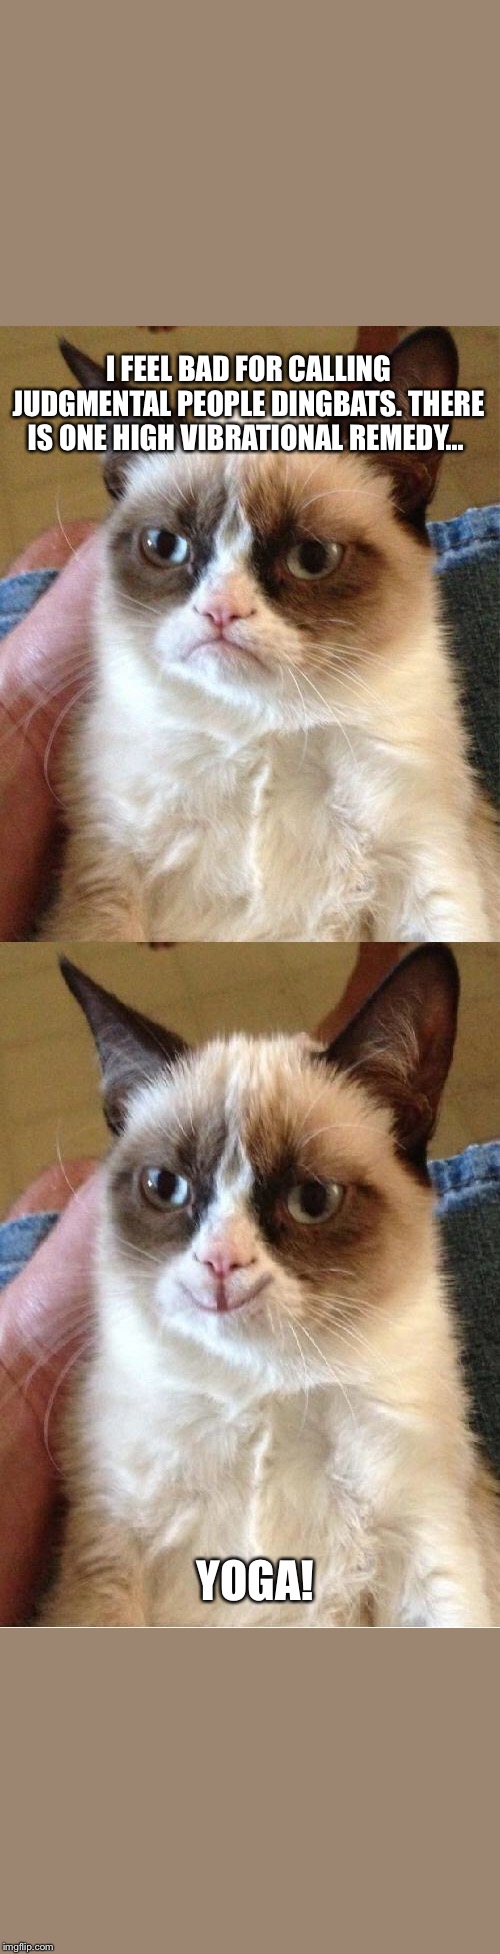 Grumpy Cat 2x Smile | I FEEL BAD FOR CALLING JUDGMENTAL PEOPLE DINGBATS. THERE IS ONE HIGH VIBRATIONAL REMEDY... YOGA! | image tagged in grumpy cat 2x smile | made w/ Imgflip meme maker